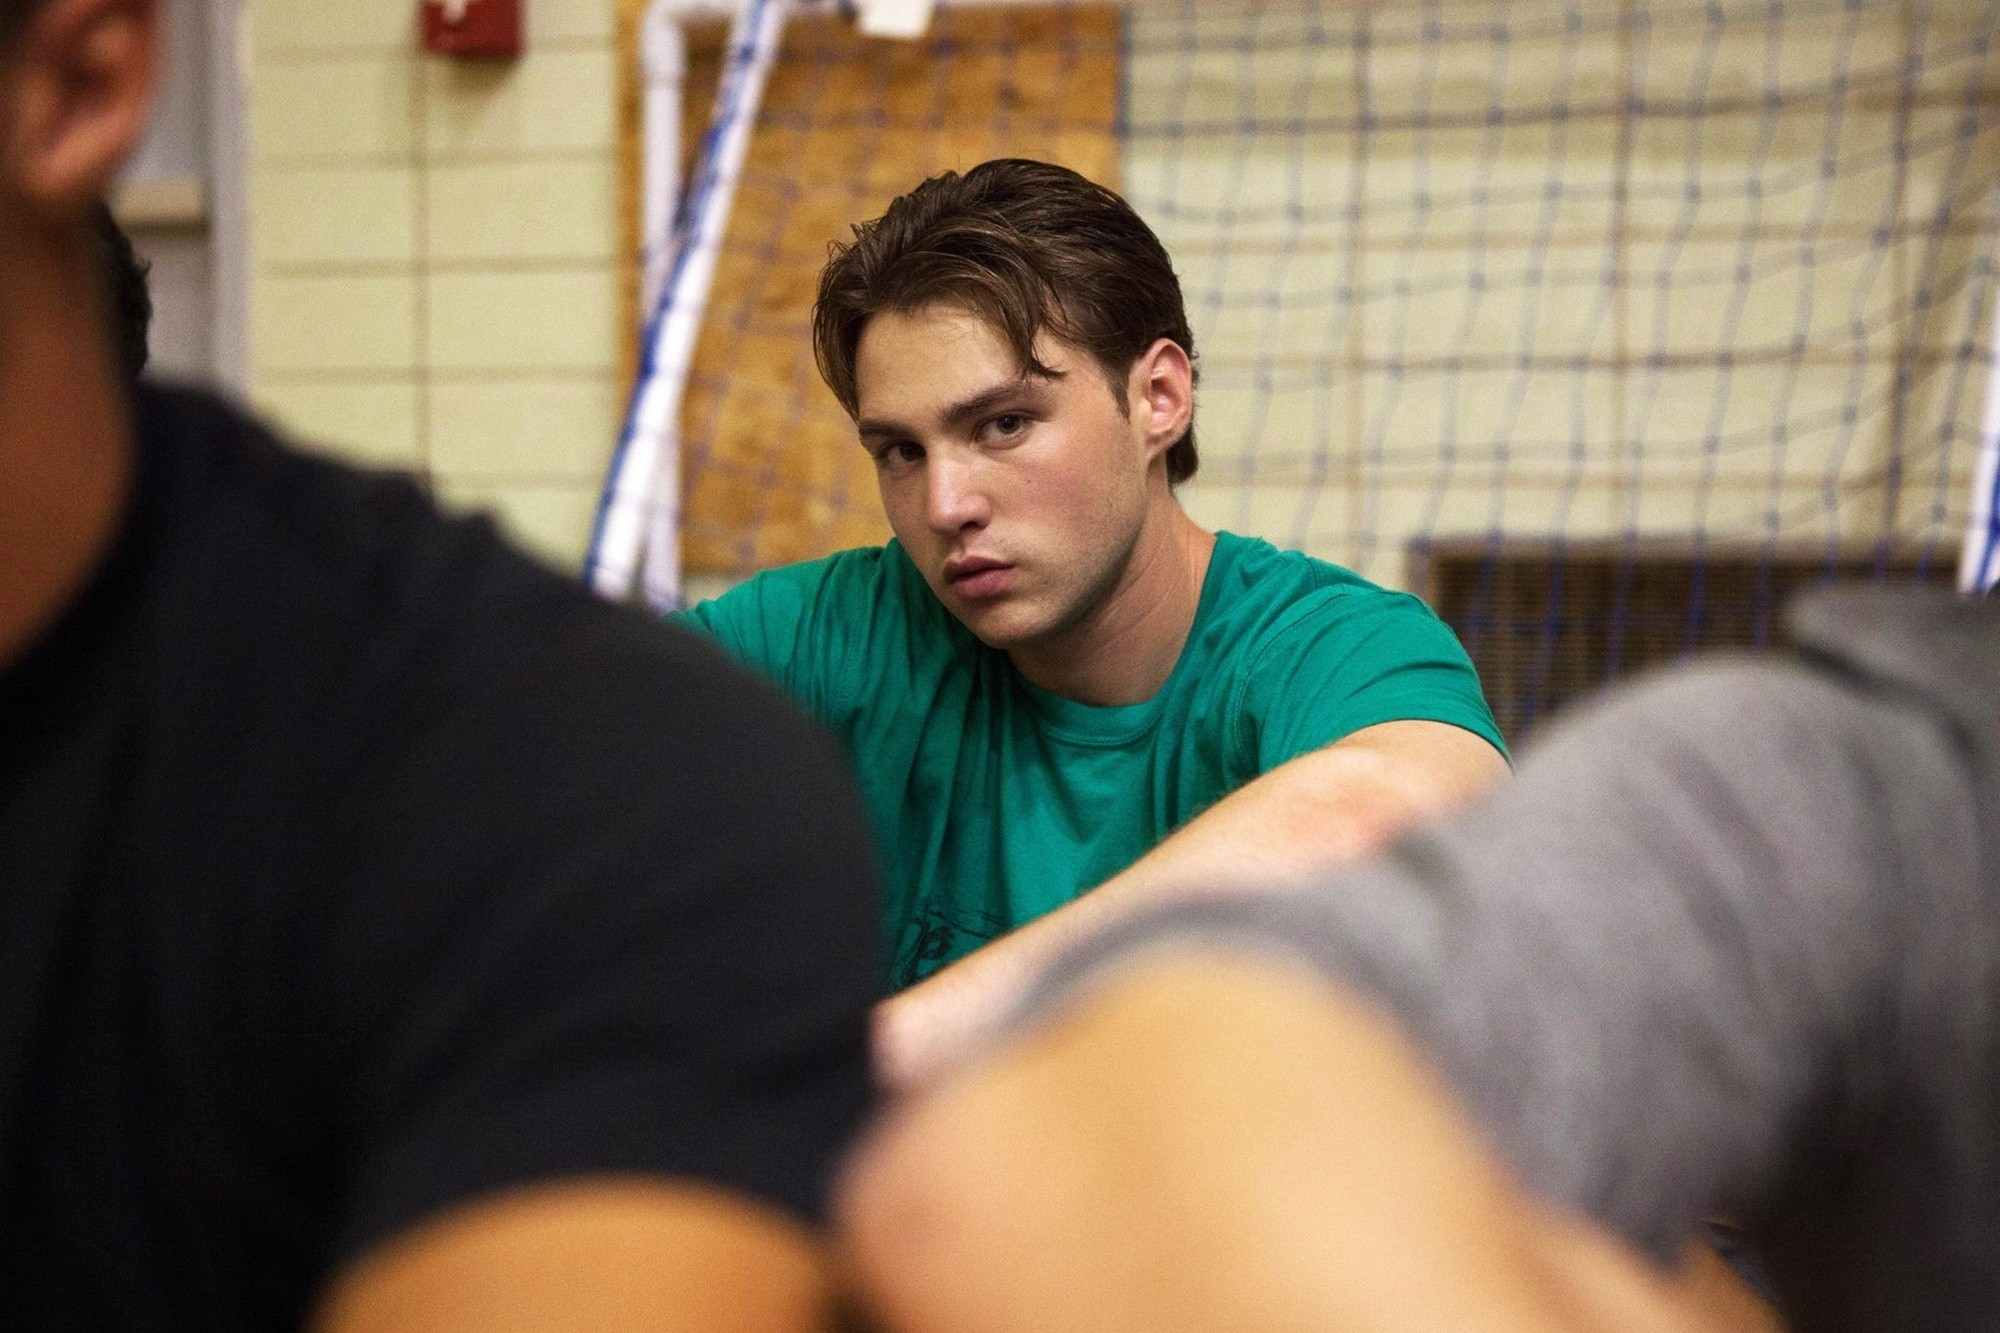 Emory Cohen stars as AJ in Focus Features' The Place Beyond the Pines (2013). Photo credit by Atsushi Nishijima.